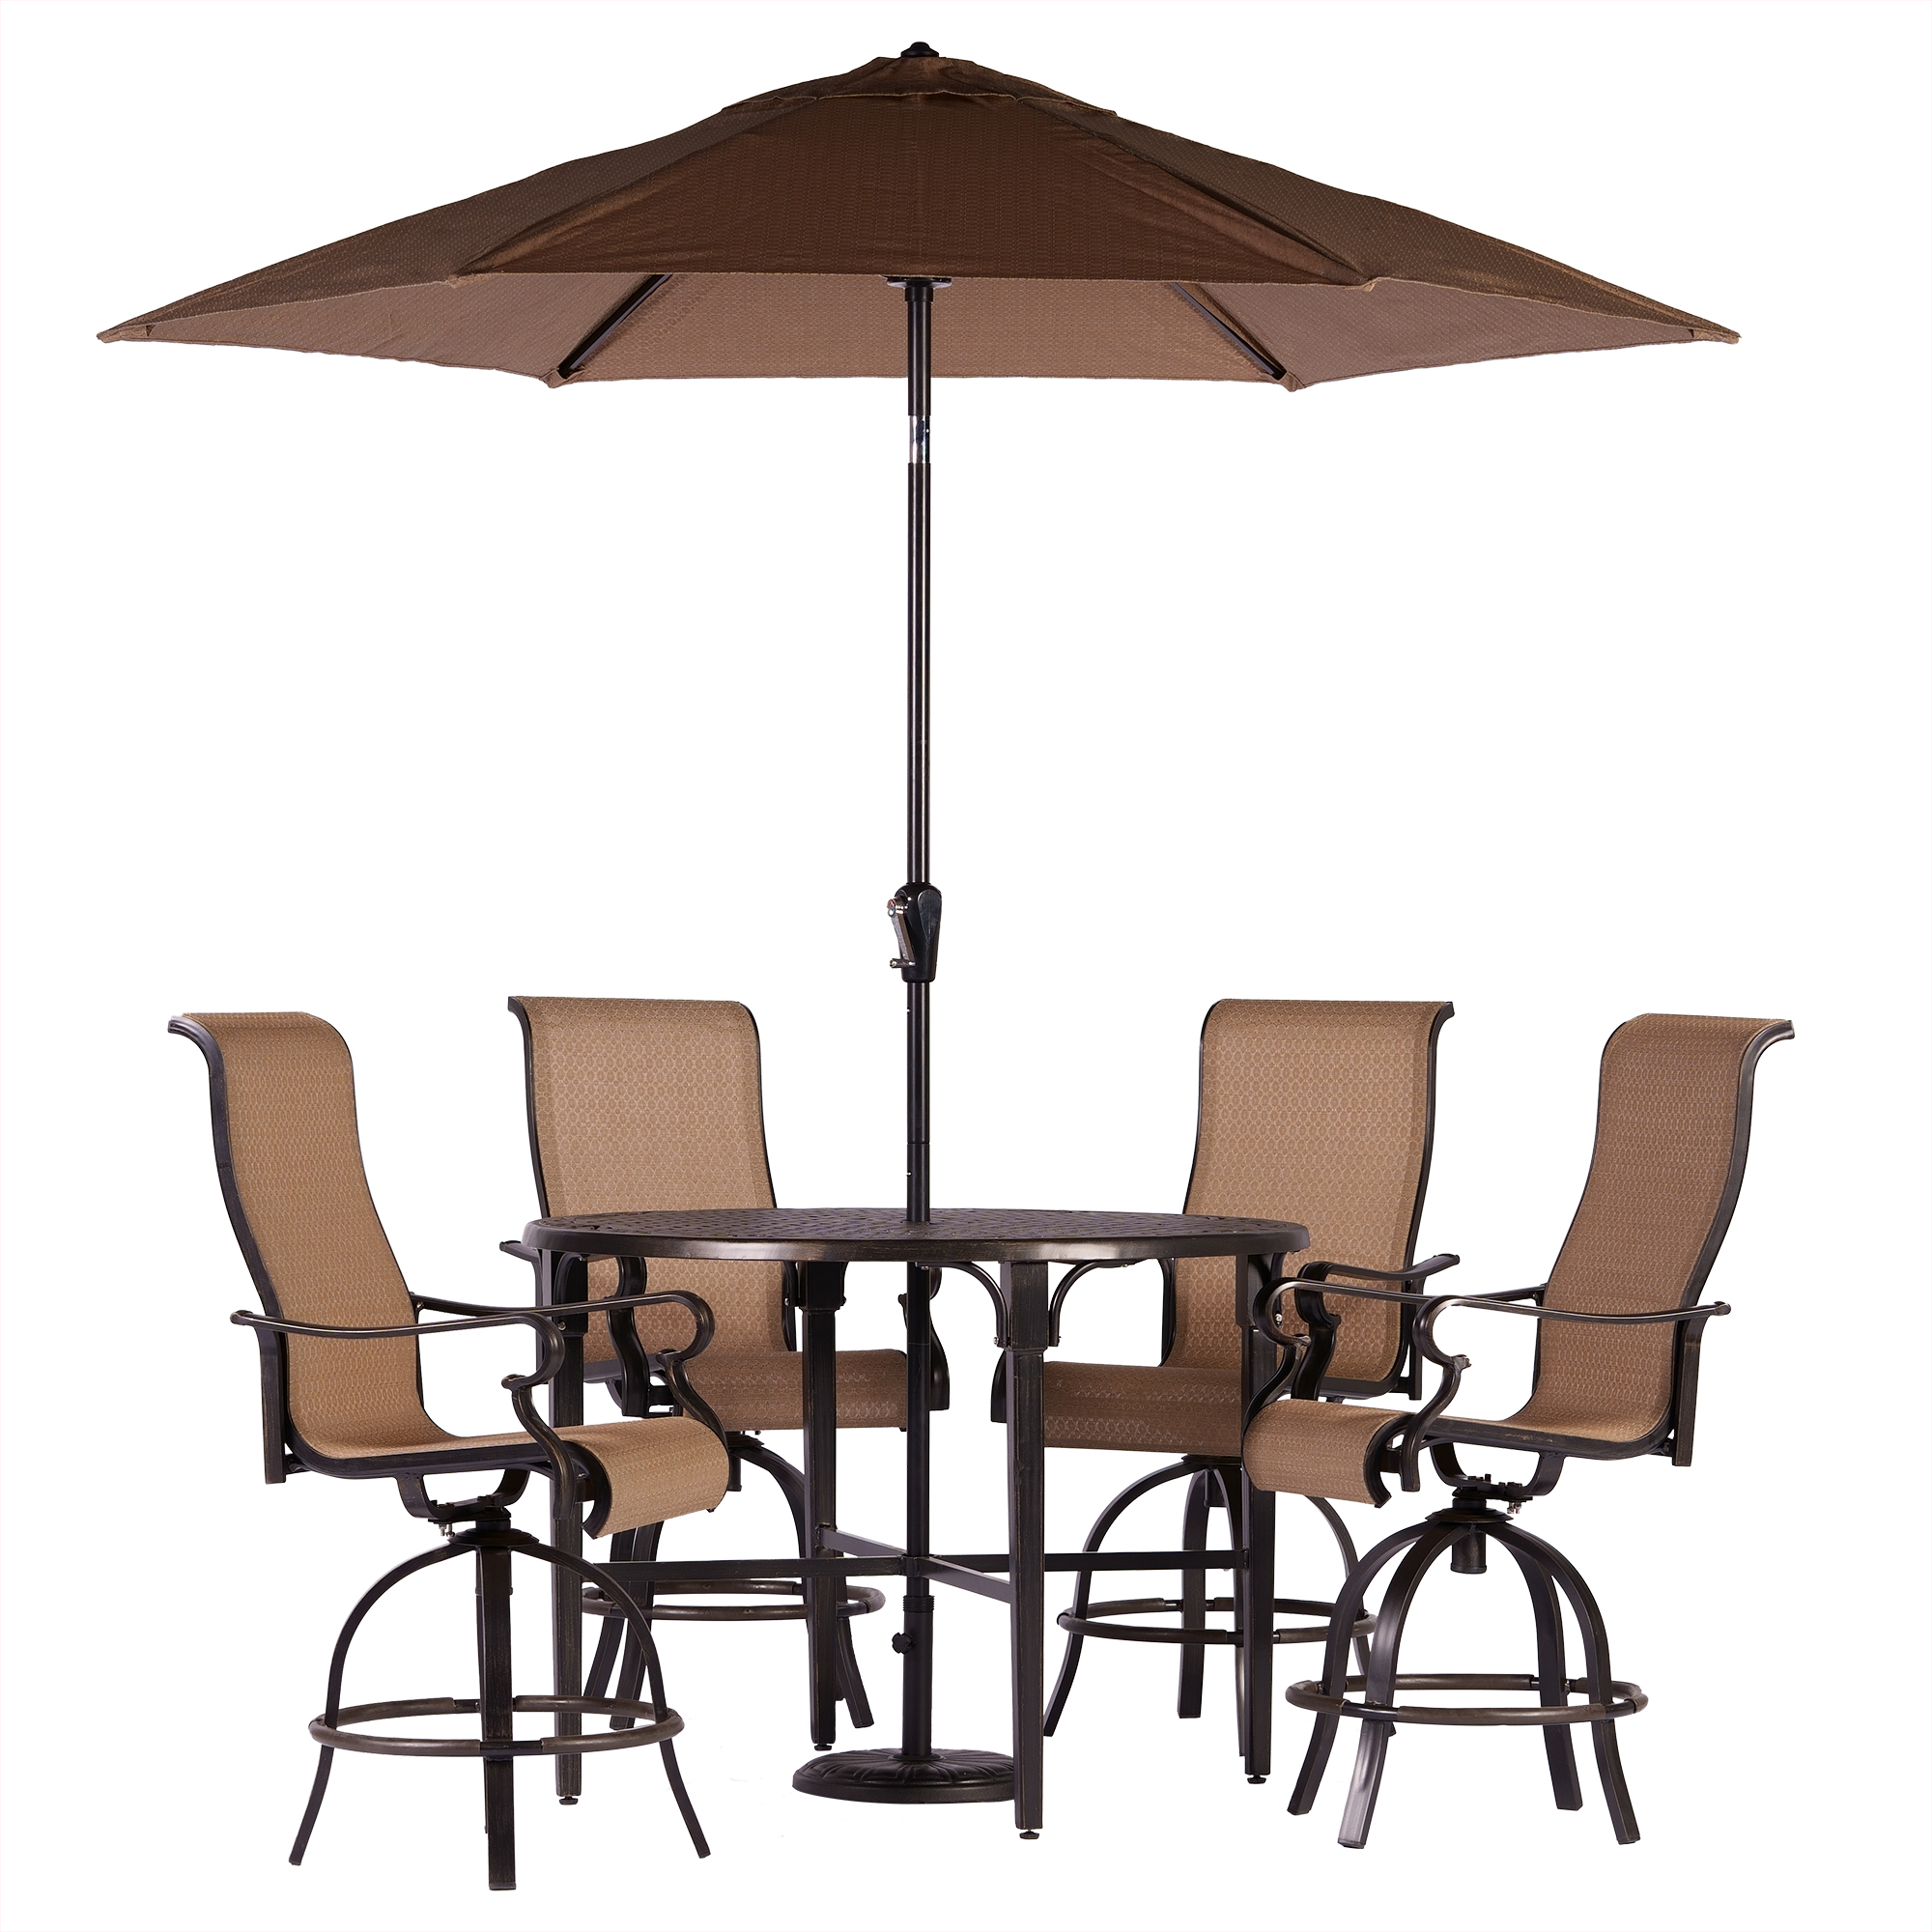 Hanover Brigantine 5-Piece Modern Outdoor High-Dining Set with Umbrella | 4 Countoured Counter-Height Swivel Chairs | 50'' Round Cast-Top Table | Weather, Rust, UV Resistant | Tan/Bronze | BRIGDN5PCBR - image 1 of 11